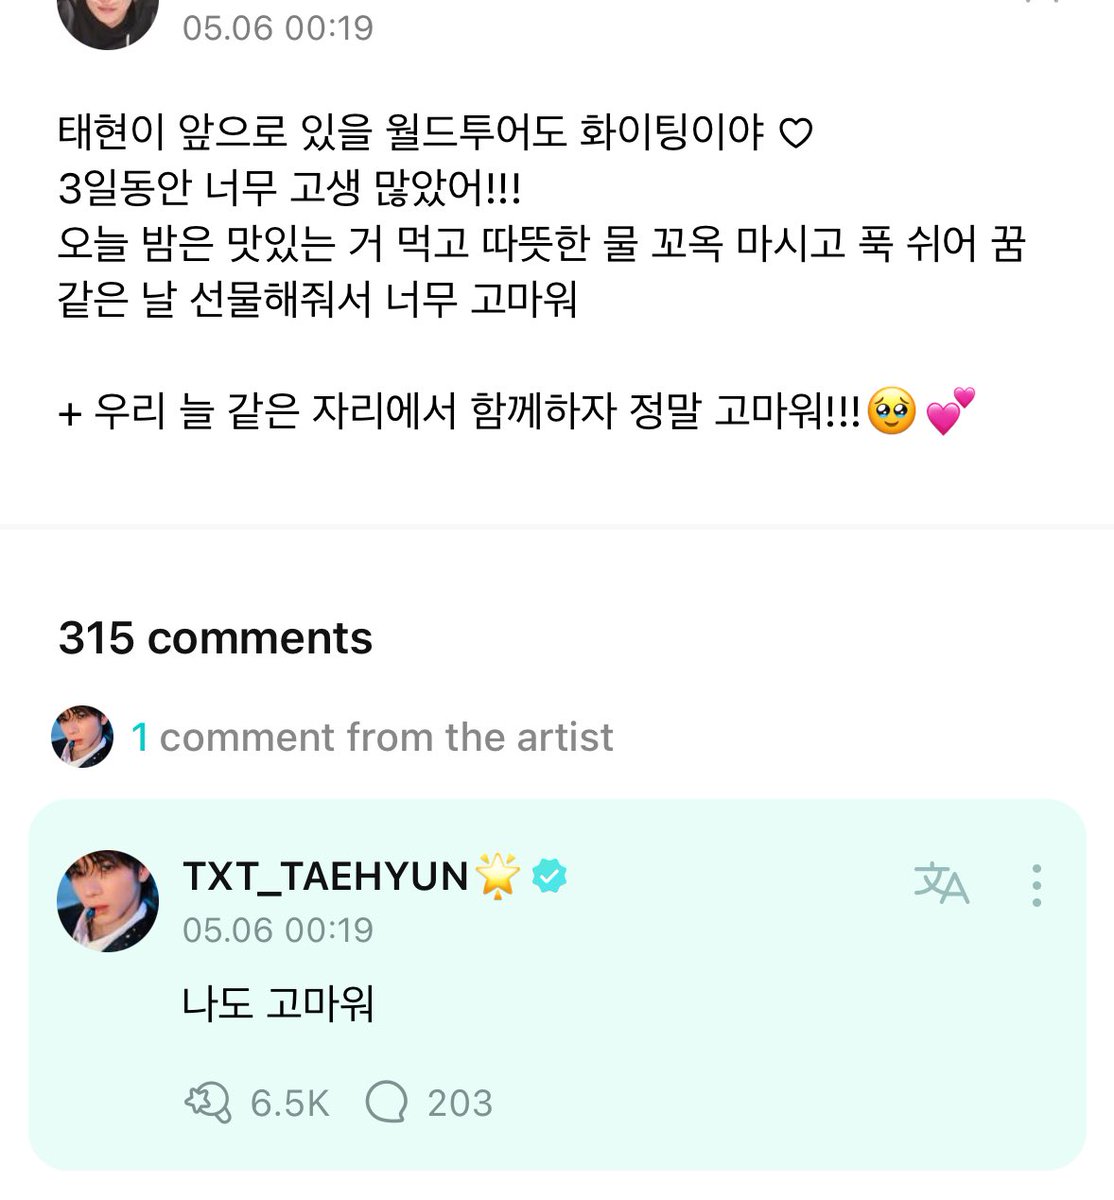 ⭐️taehyun, good luck in the remainder of the tour ♡ you’ve worked so hard for the past 3 days!!! tonight make sure to eat something delicious, have some warm water, rest well. thank you for gifting me this dream like day 🐿️i’m thankful for you too @TXT_bighit @TXT_members